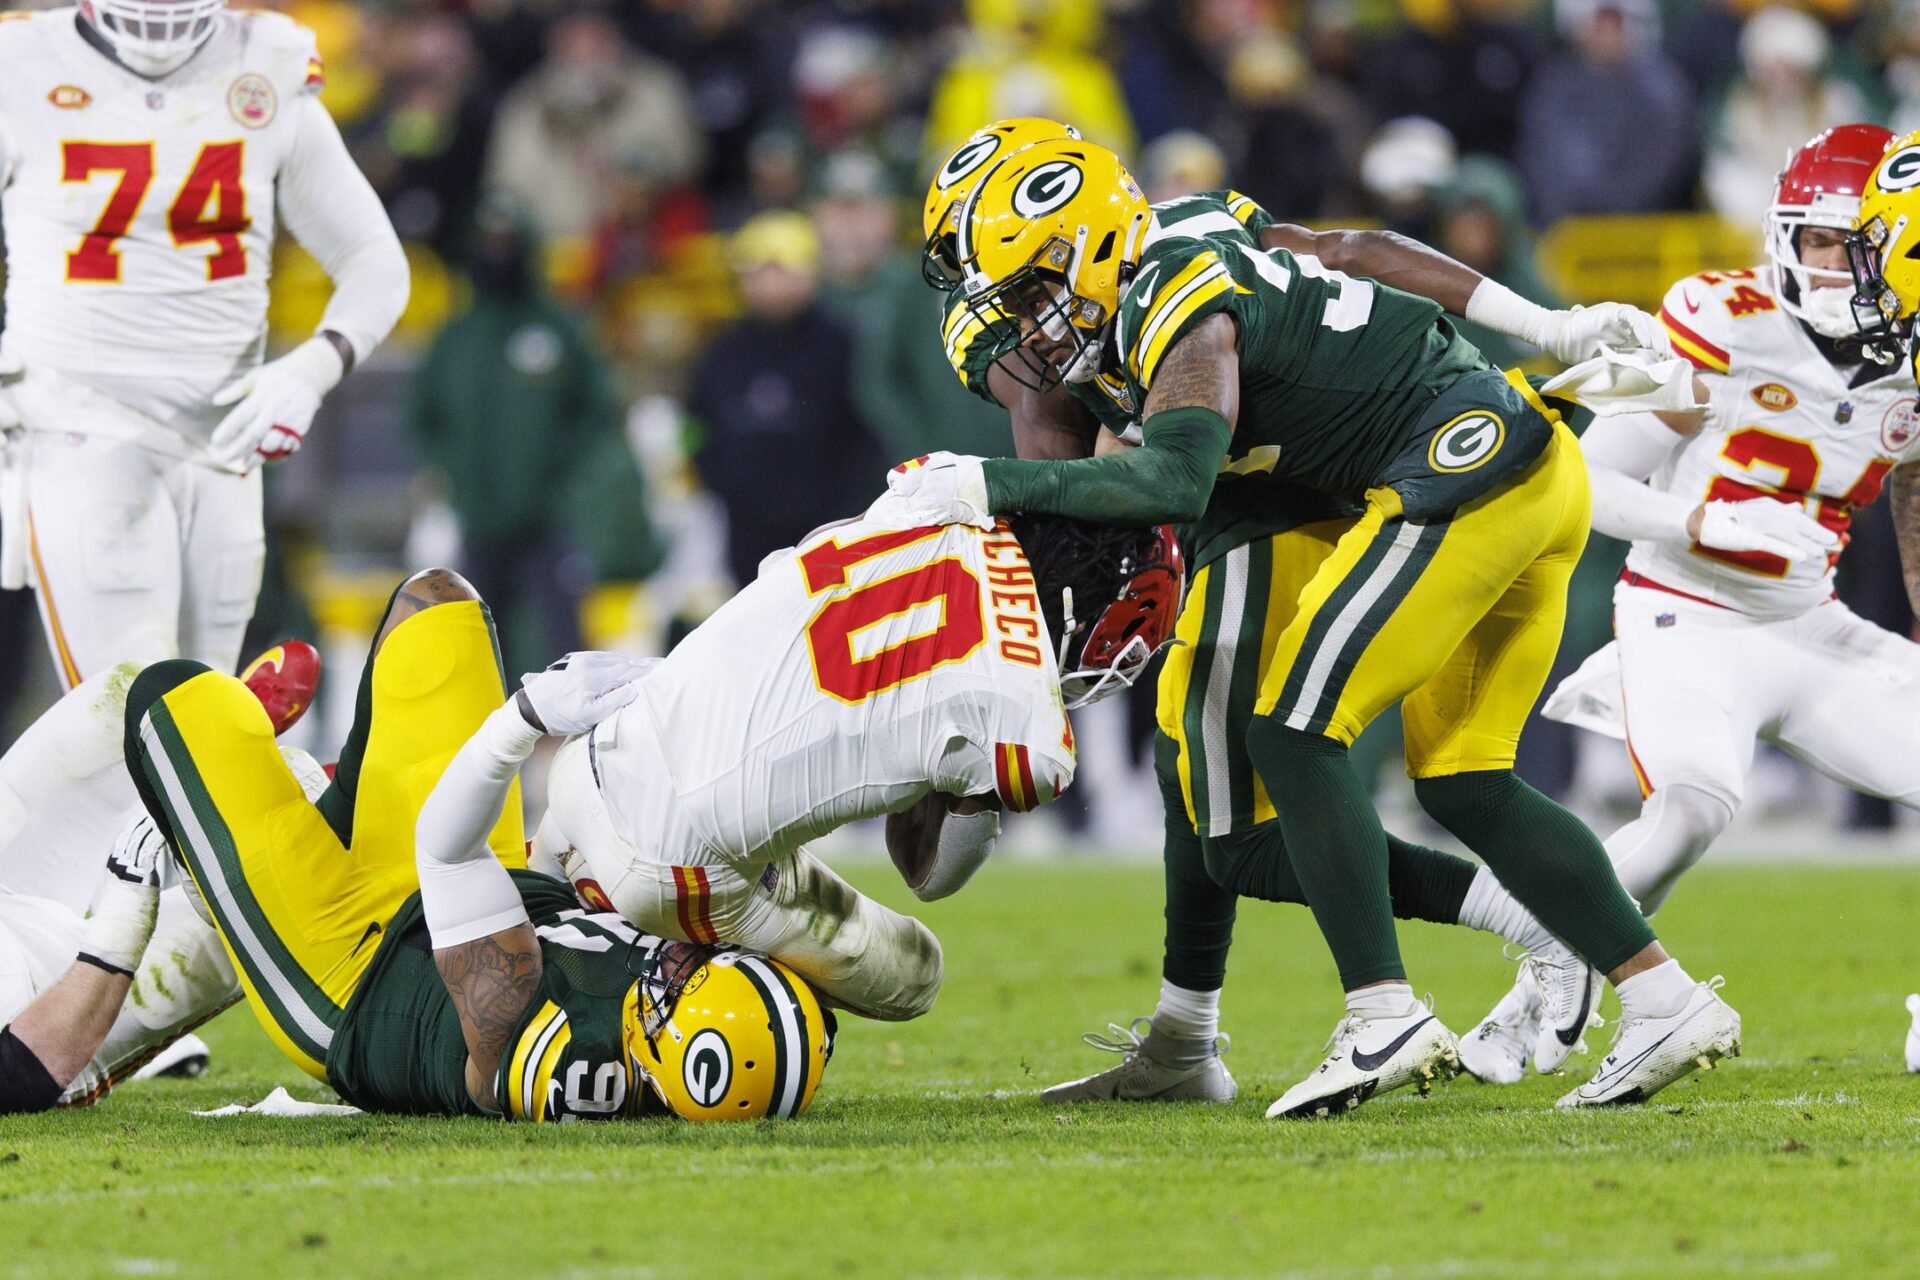 Kansas City Chiefs running back Isiah Pacheco (10) loses his helmet while being tackled by Green Bay Packers linebacker Preston Smith (91) and safety Jonathan Owens (34) during the second quarter at Lambeau Field.